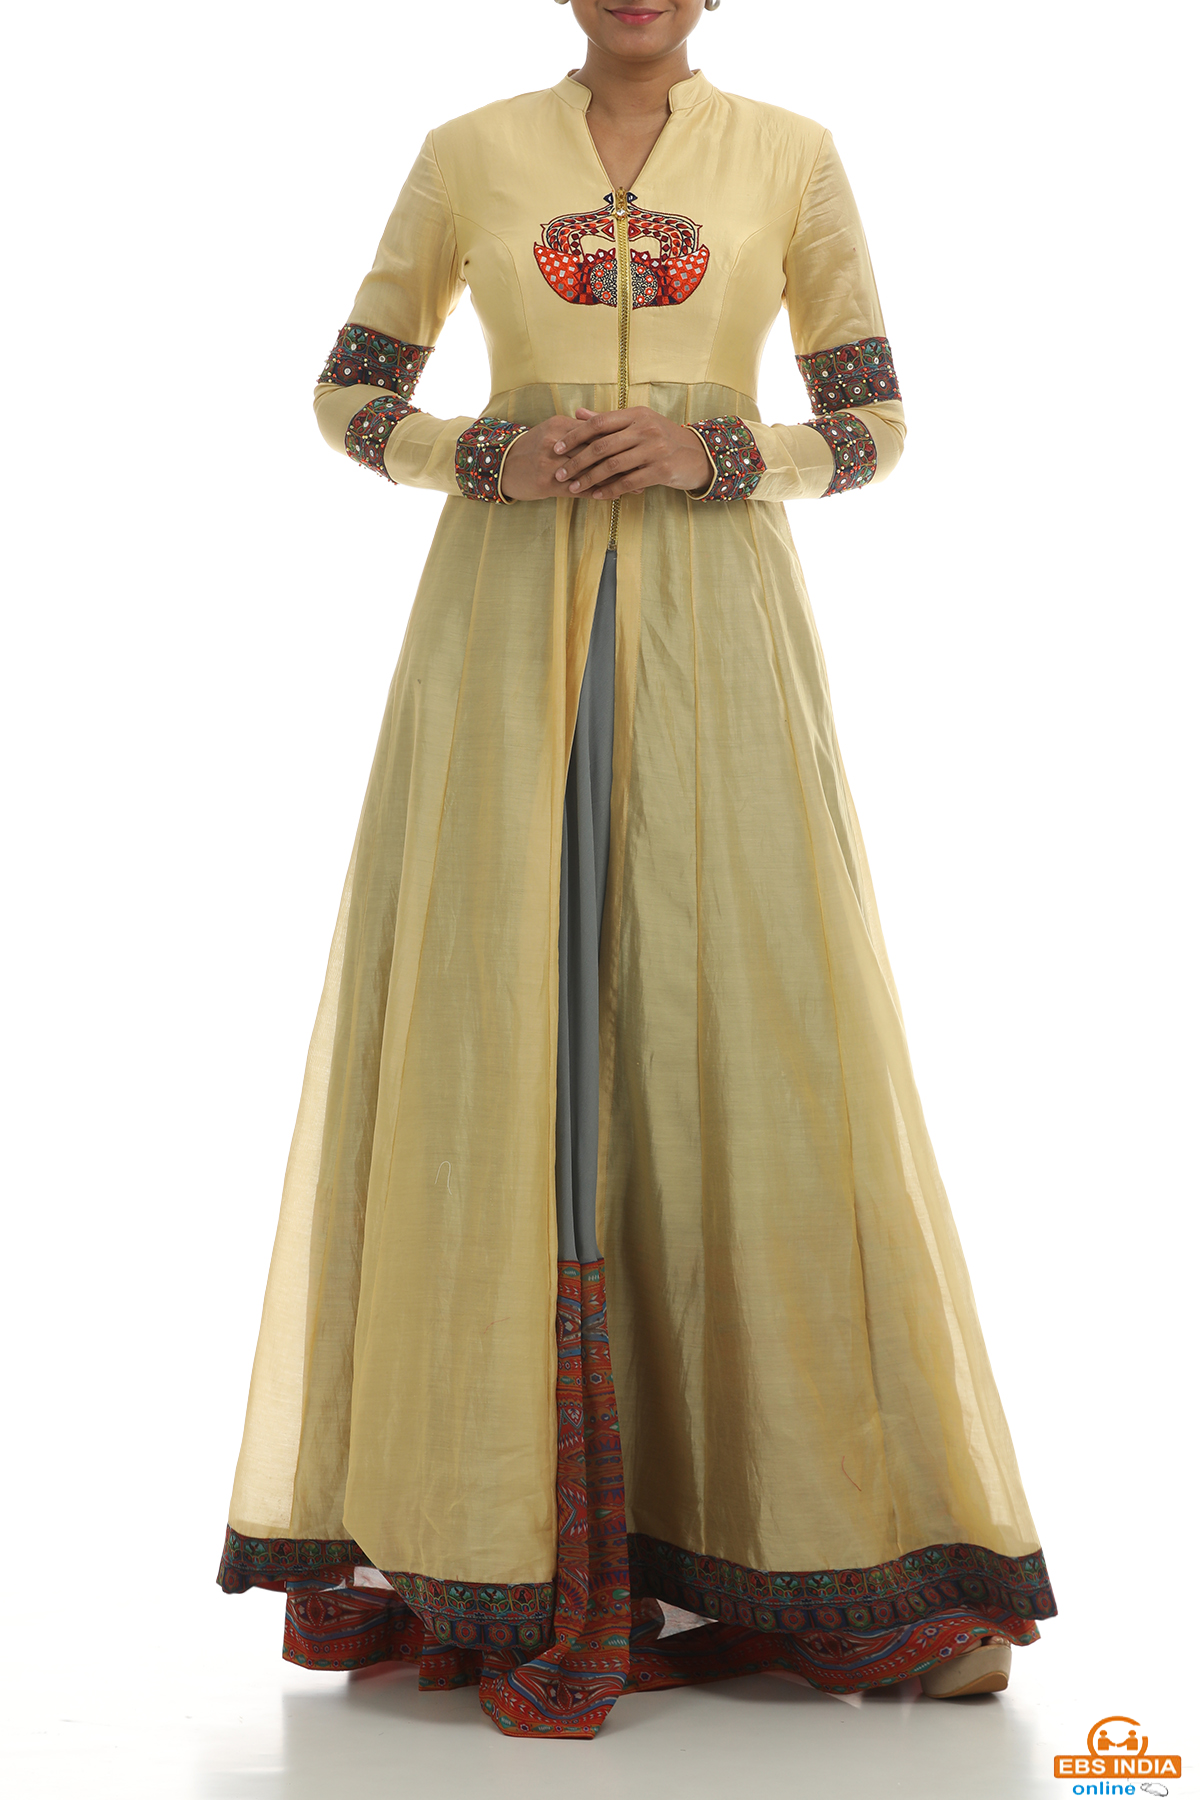 Shop For Designer Lehengas From TheHLabel Today!